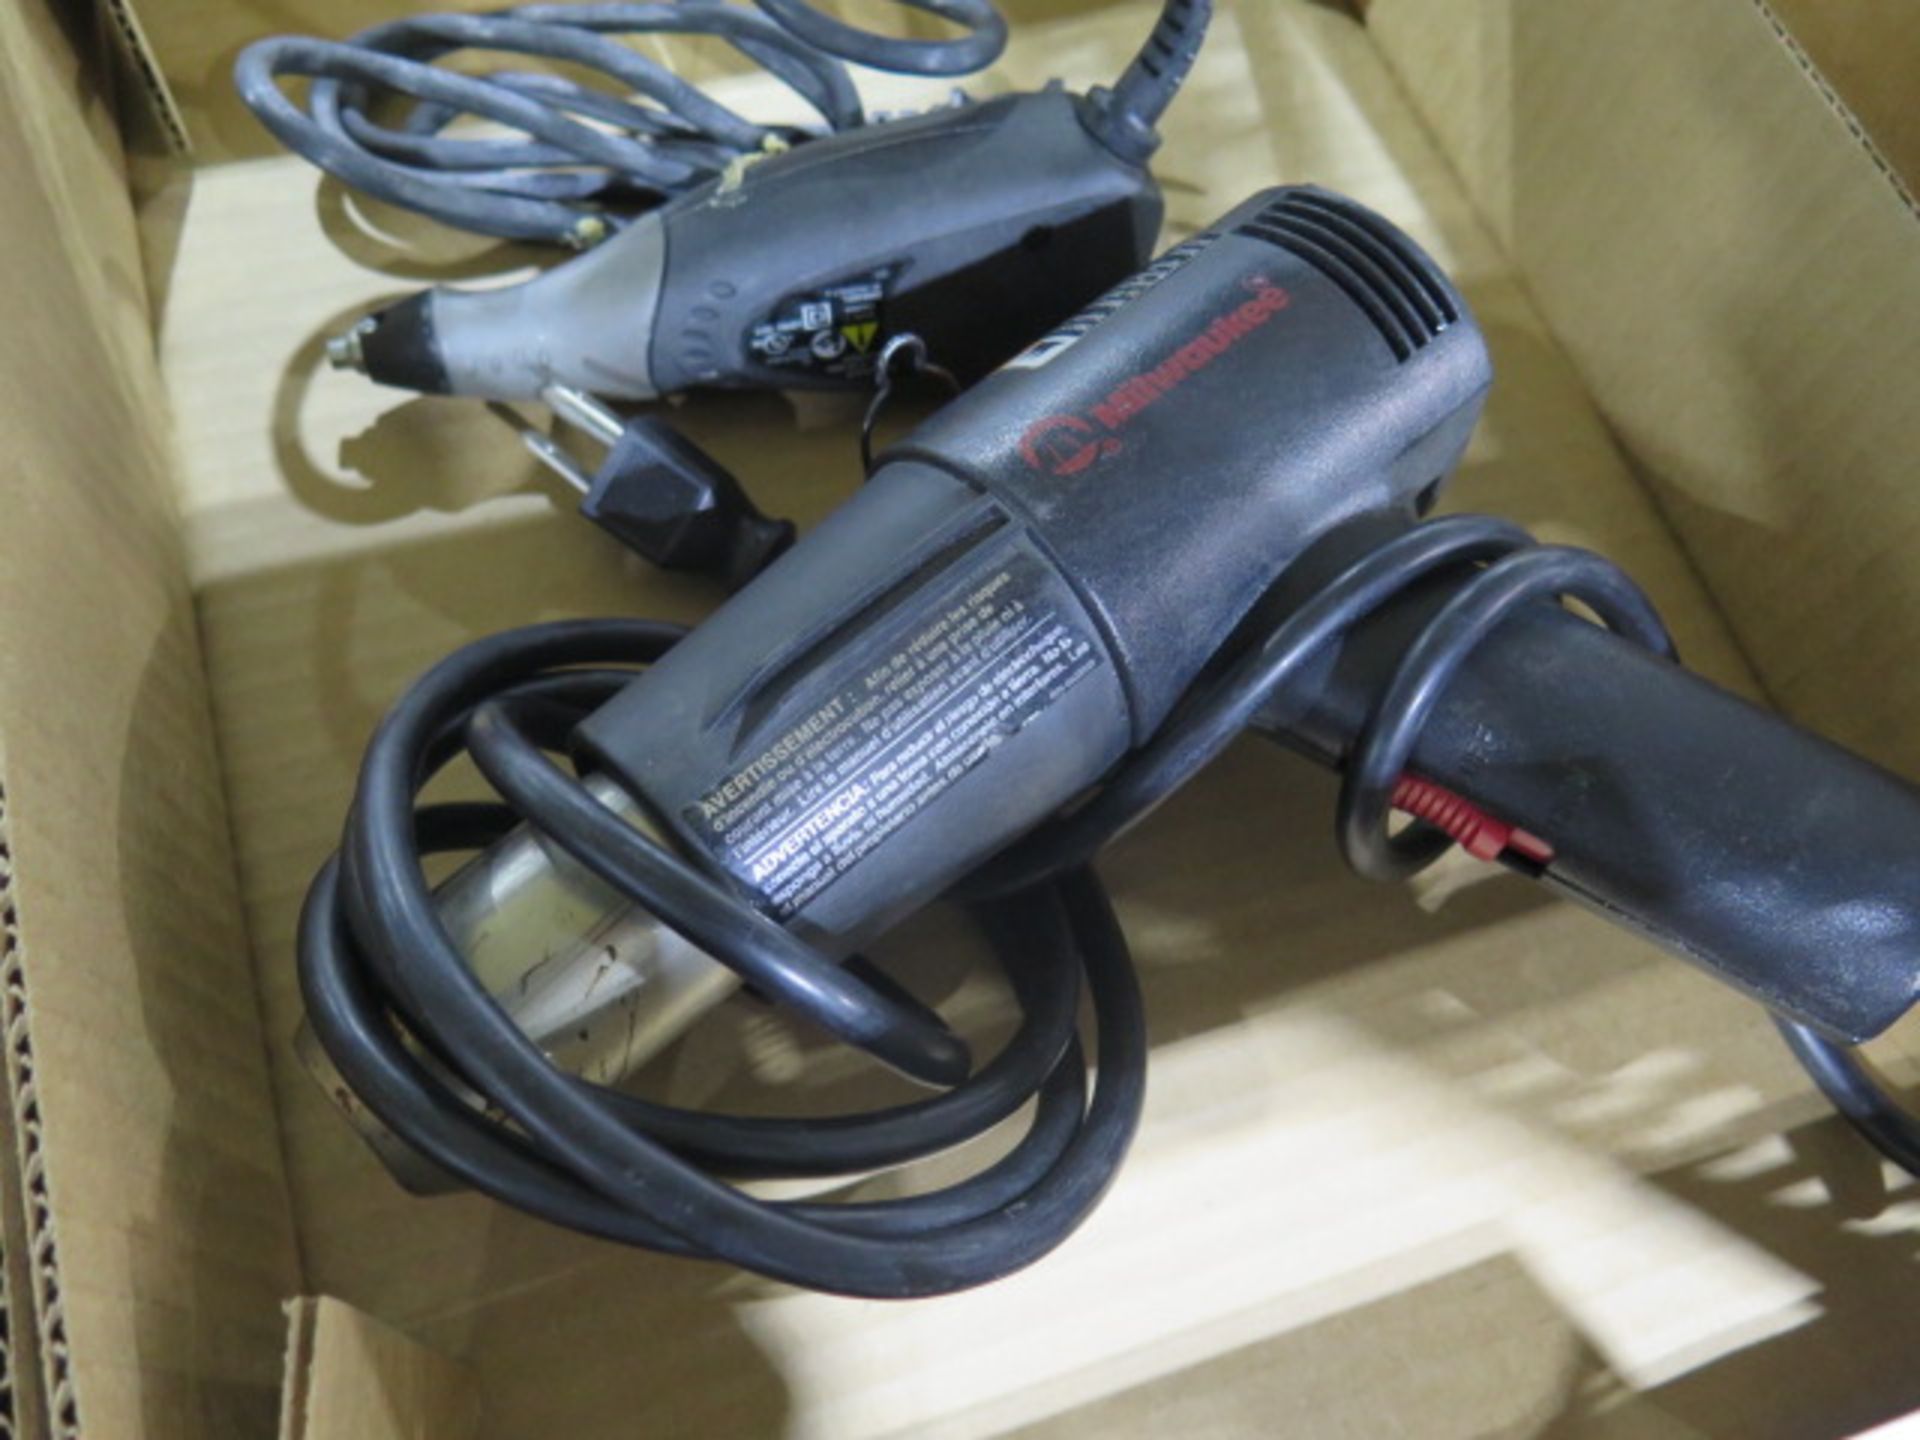 Heat Gun and Peen Engraver (SOLD AS-IS - NO WARRANTY) - Image 3 of 4